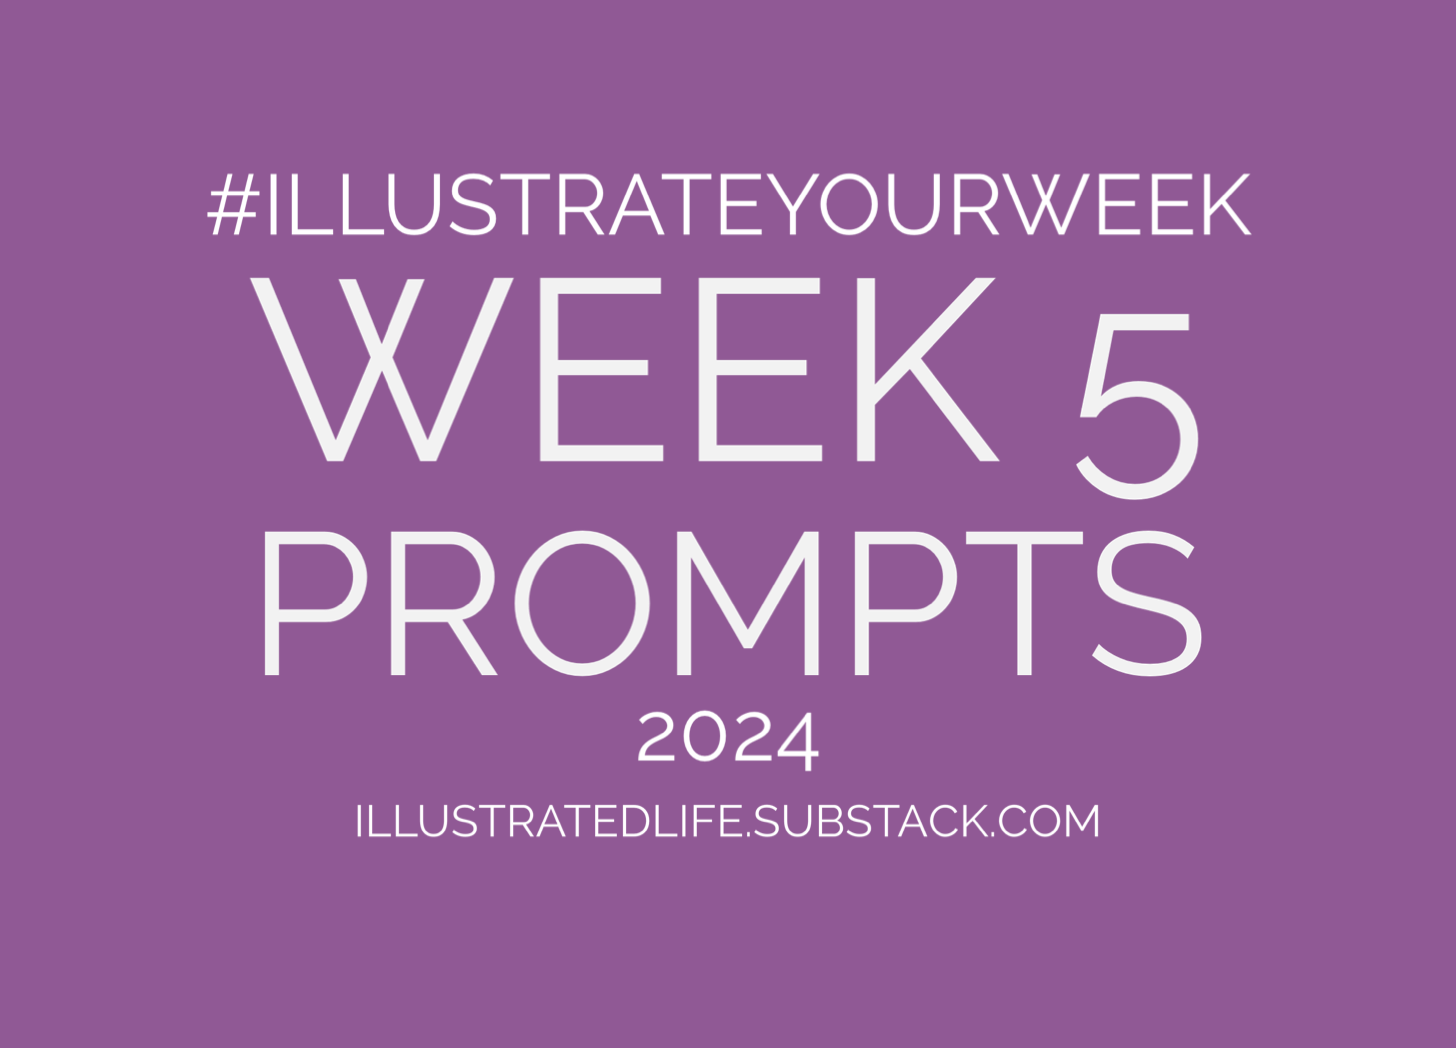 Week 5 Prompts for Illustrate Your Week 2024